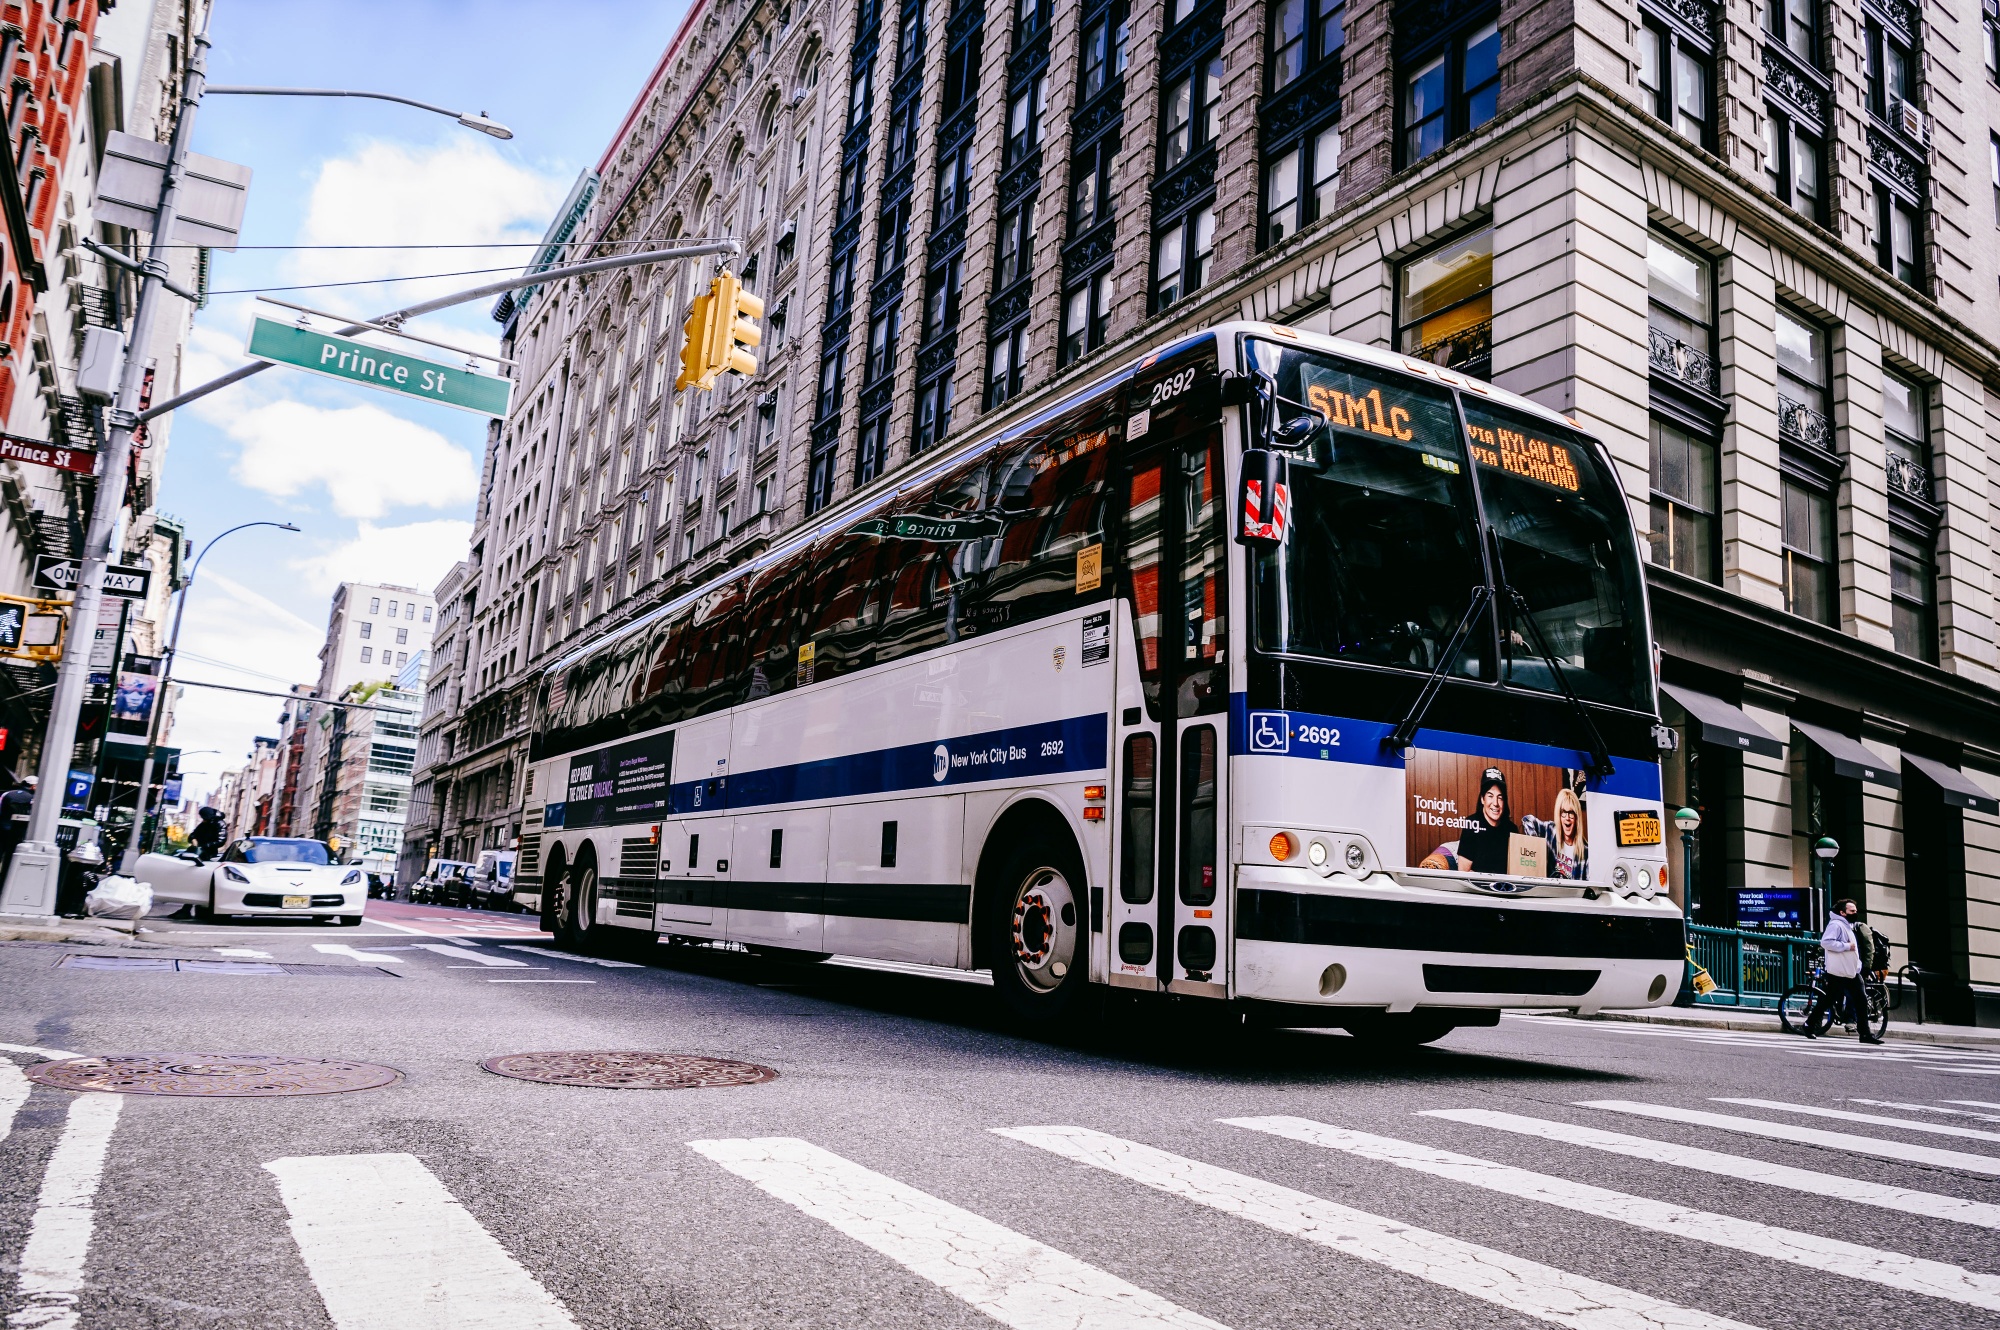 Get Excited, New York Commuters It's the 'Year of the Bus' Bloomberg